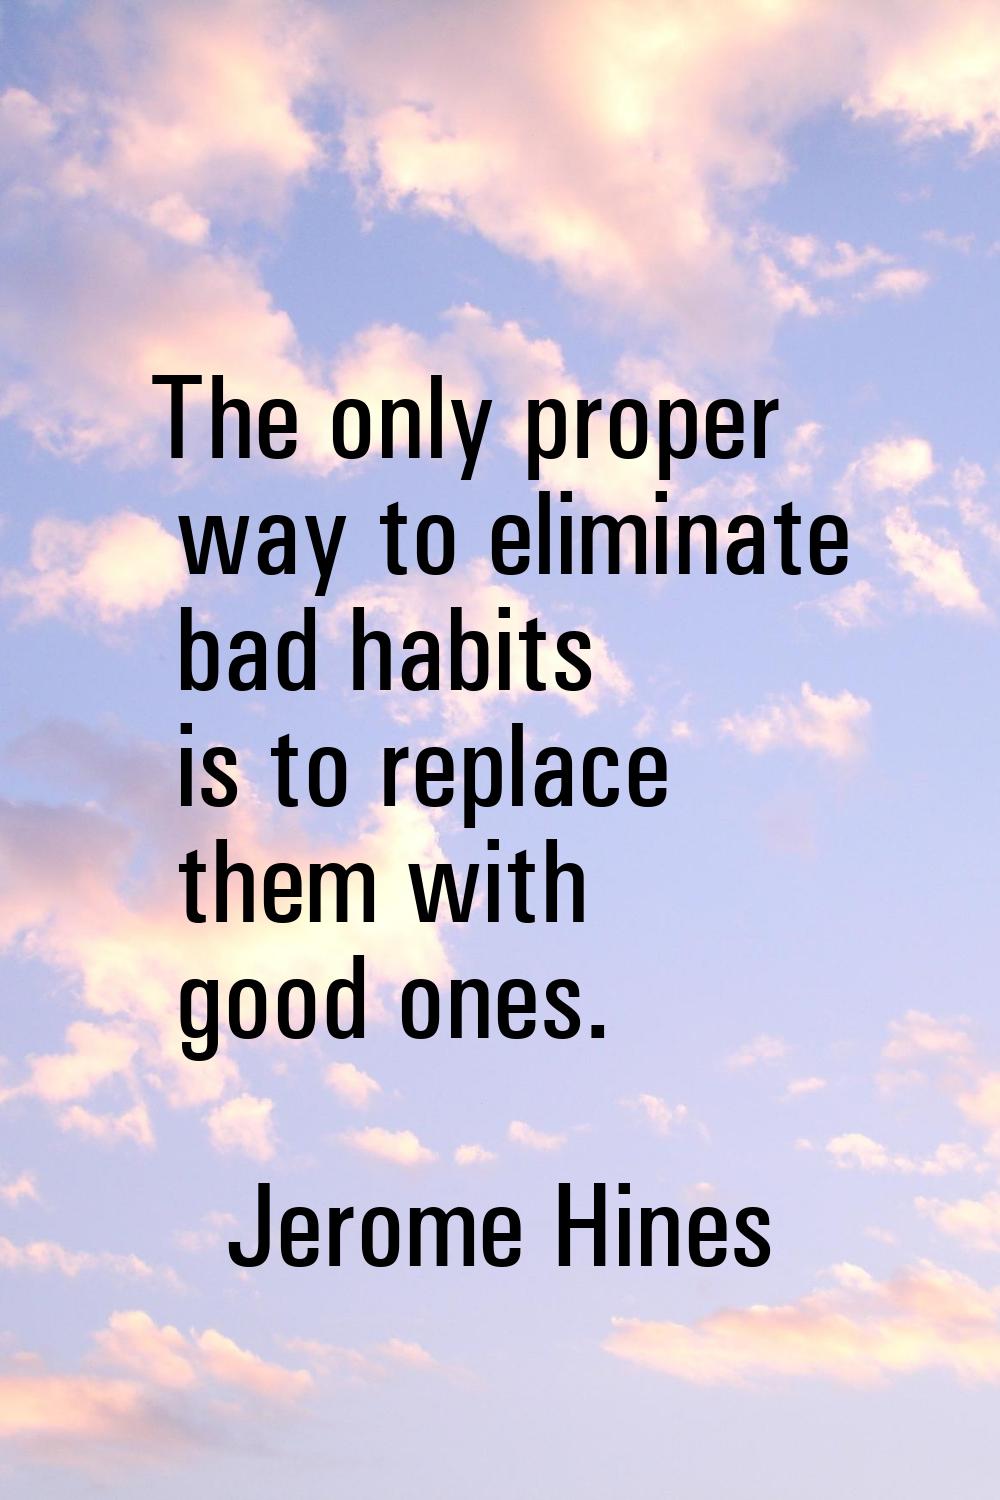 The only proper way to eliminate bad habits is to replace them with good ones.